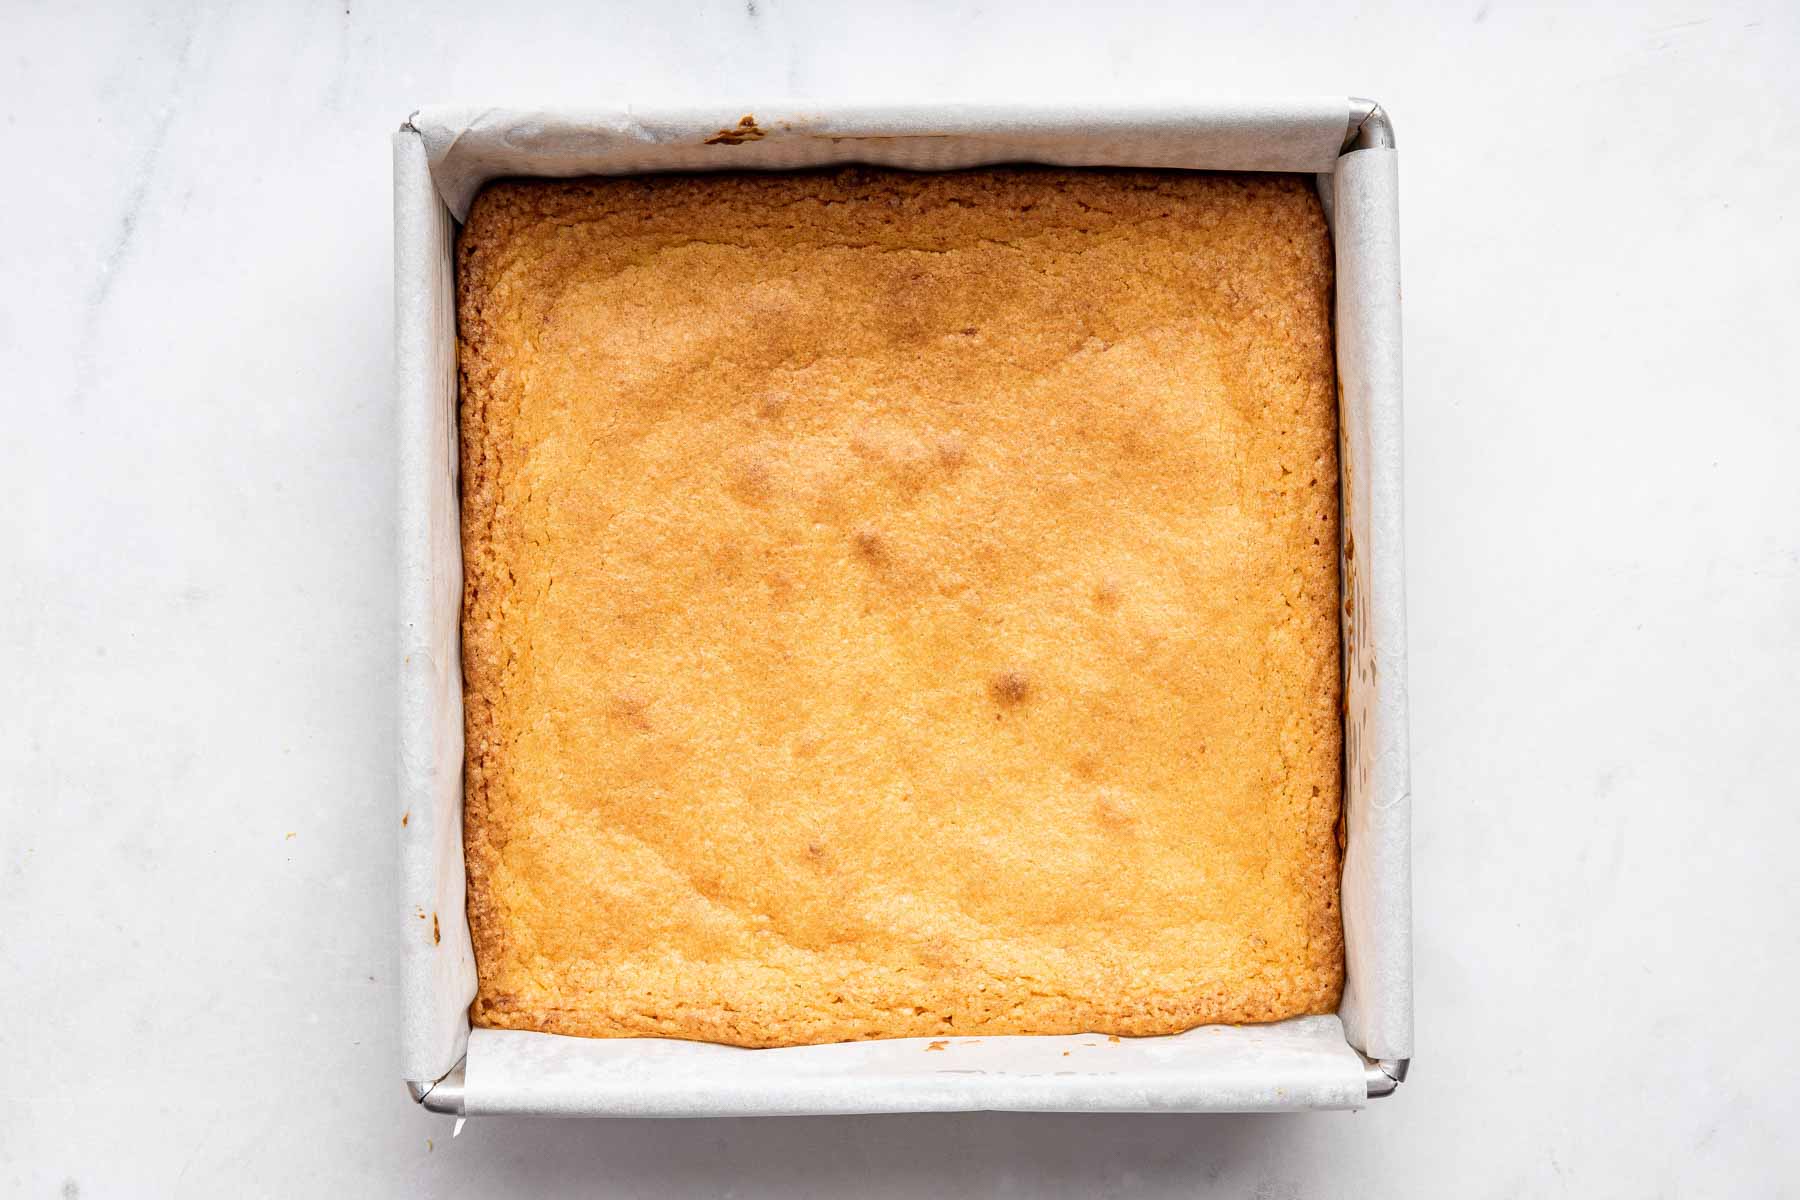 Square baking pan with yellow dessert freshly cooked.